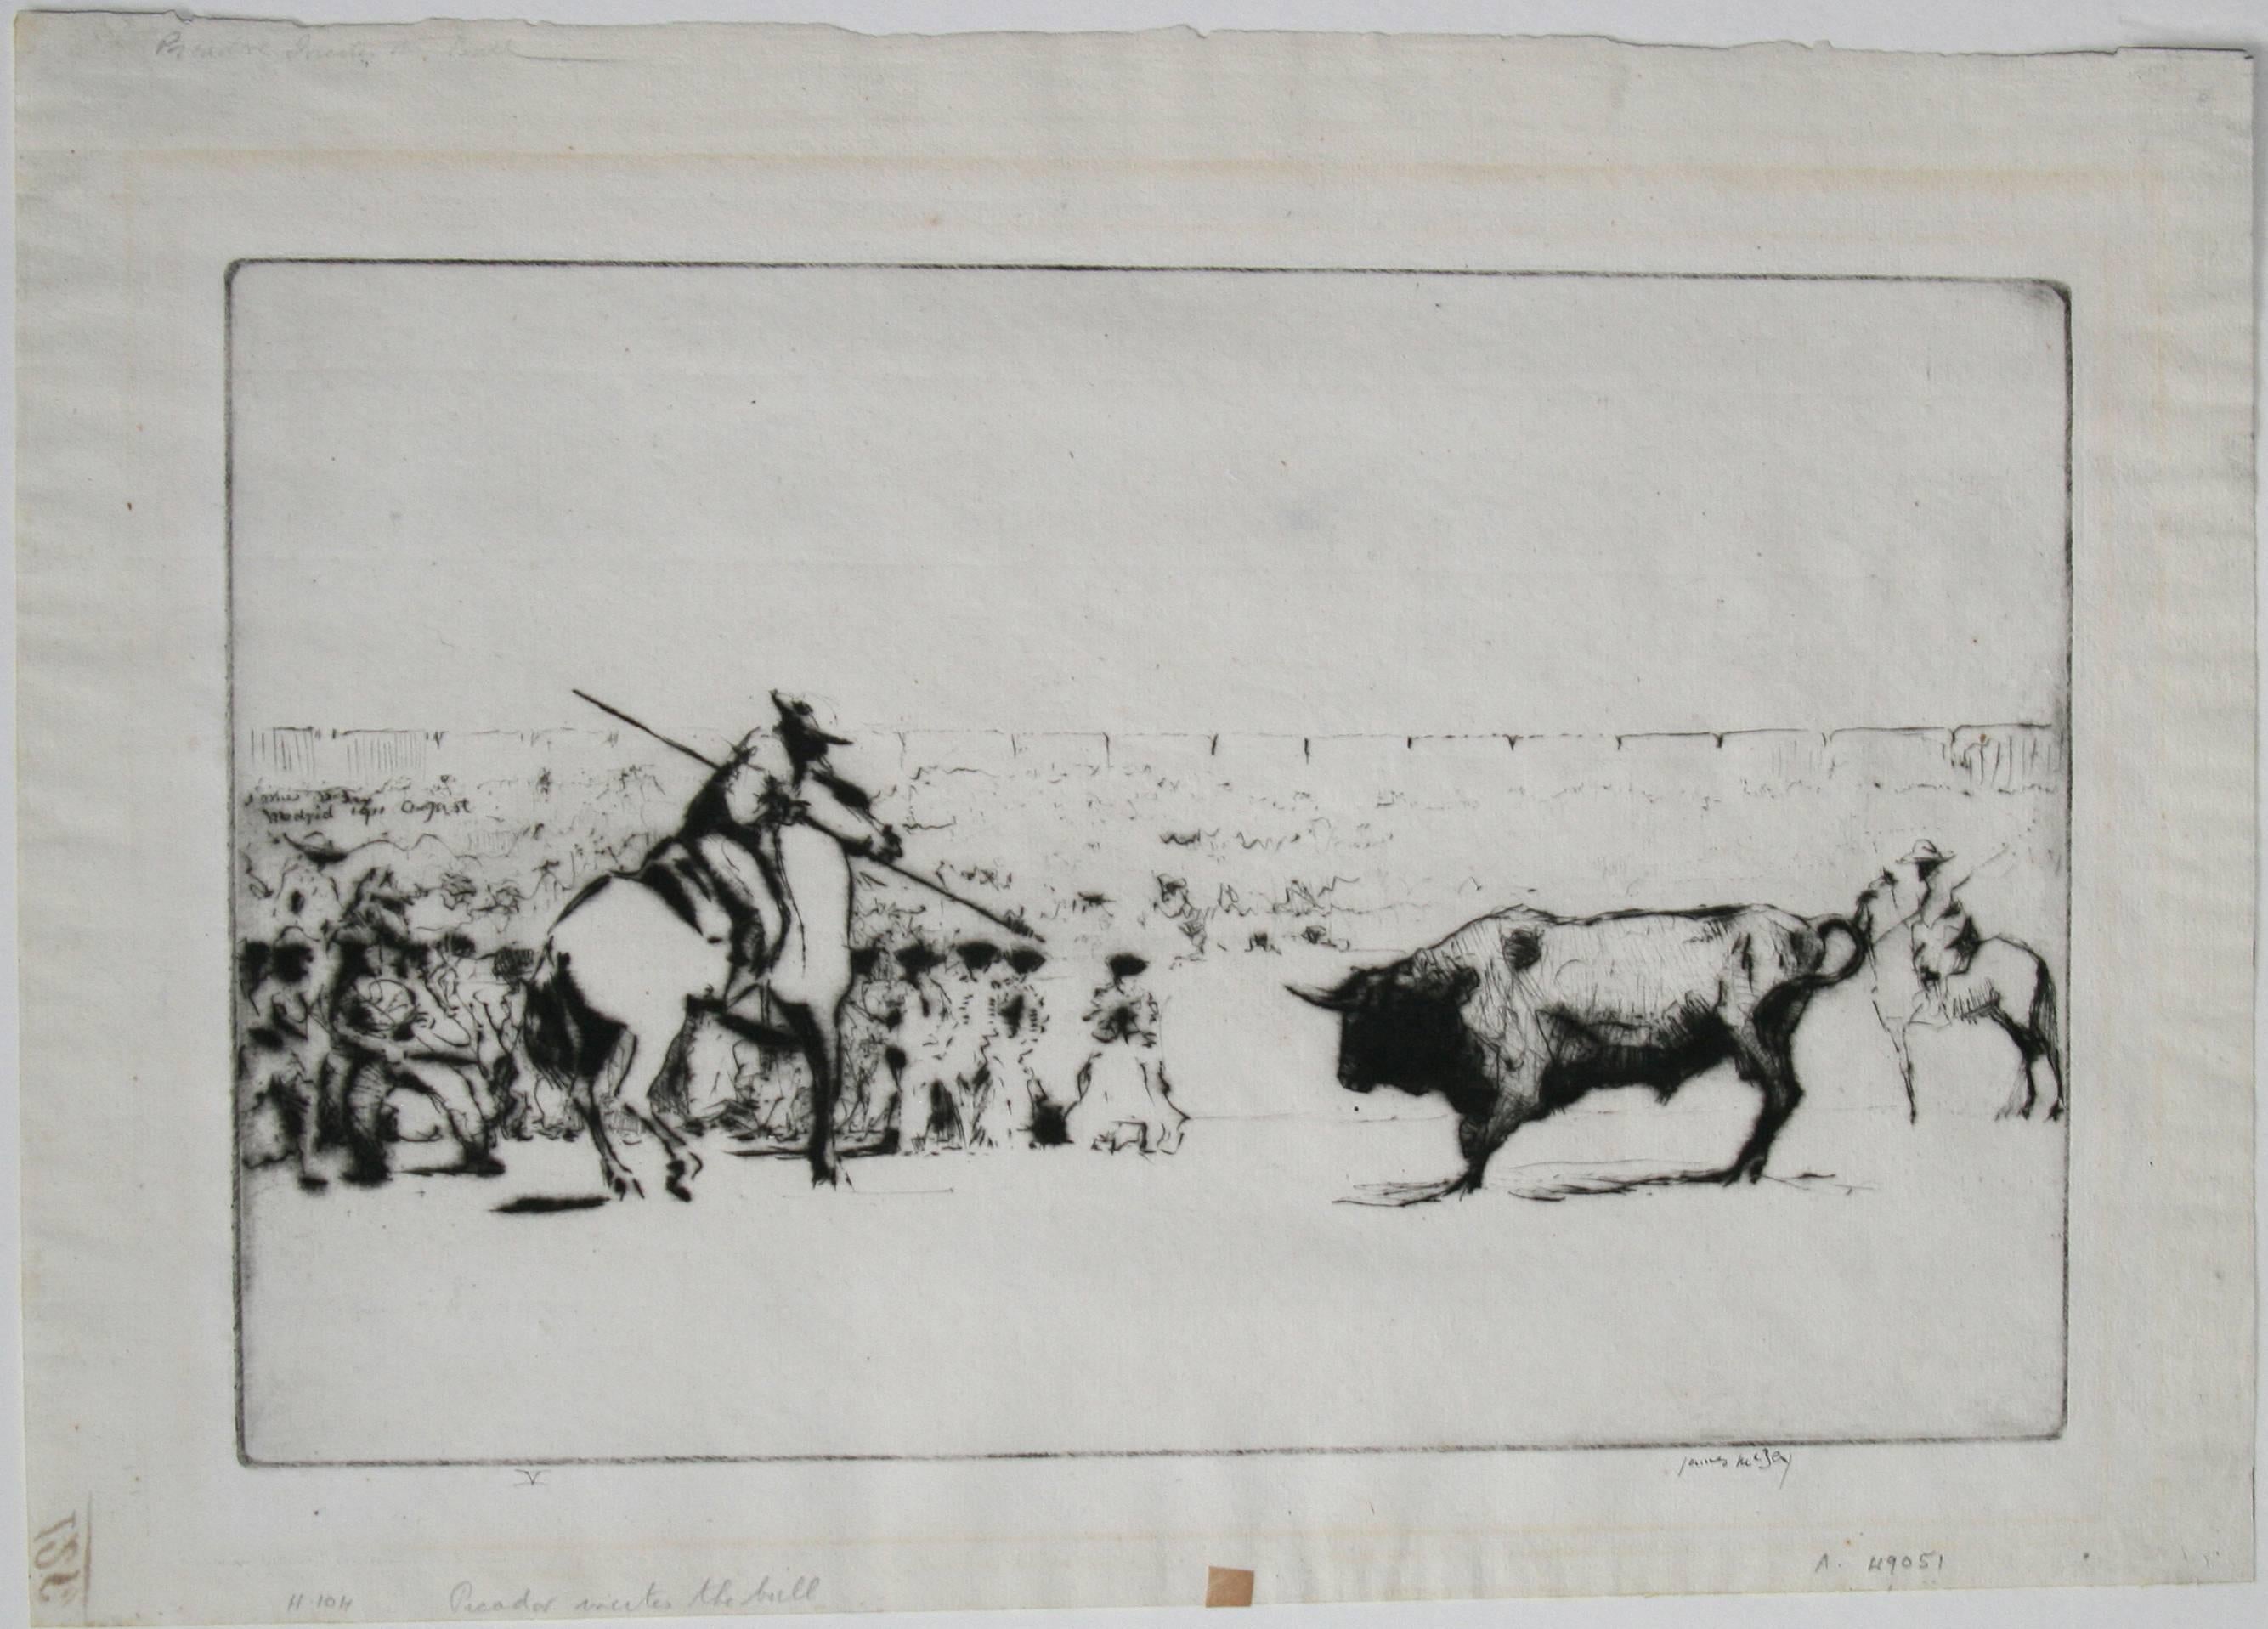 The Picador Incites the Bull. - Print by James McBey.